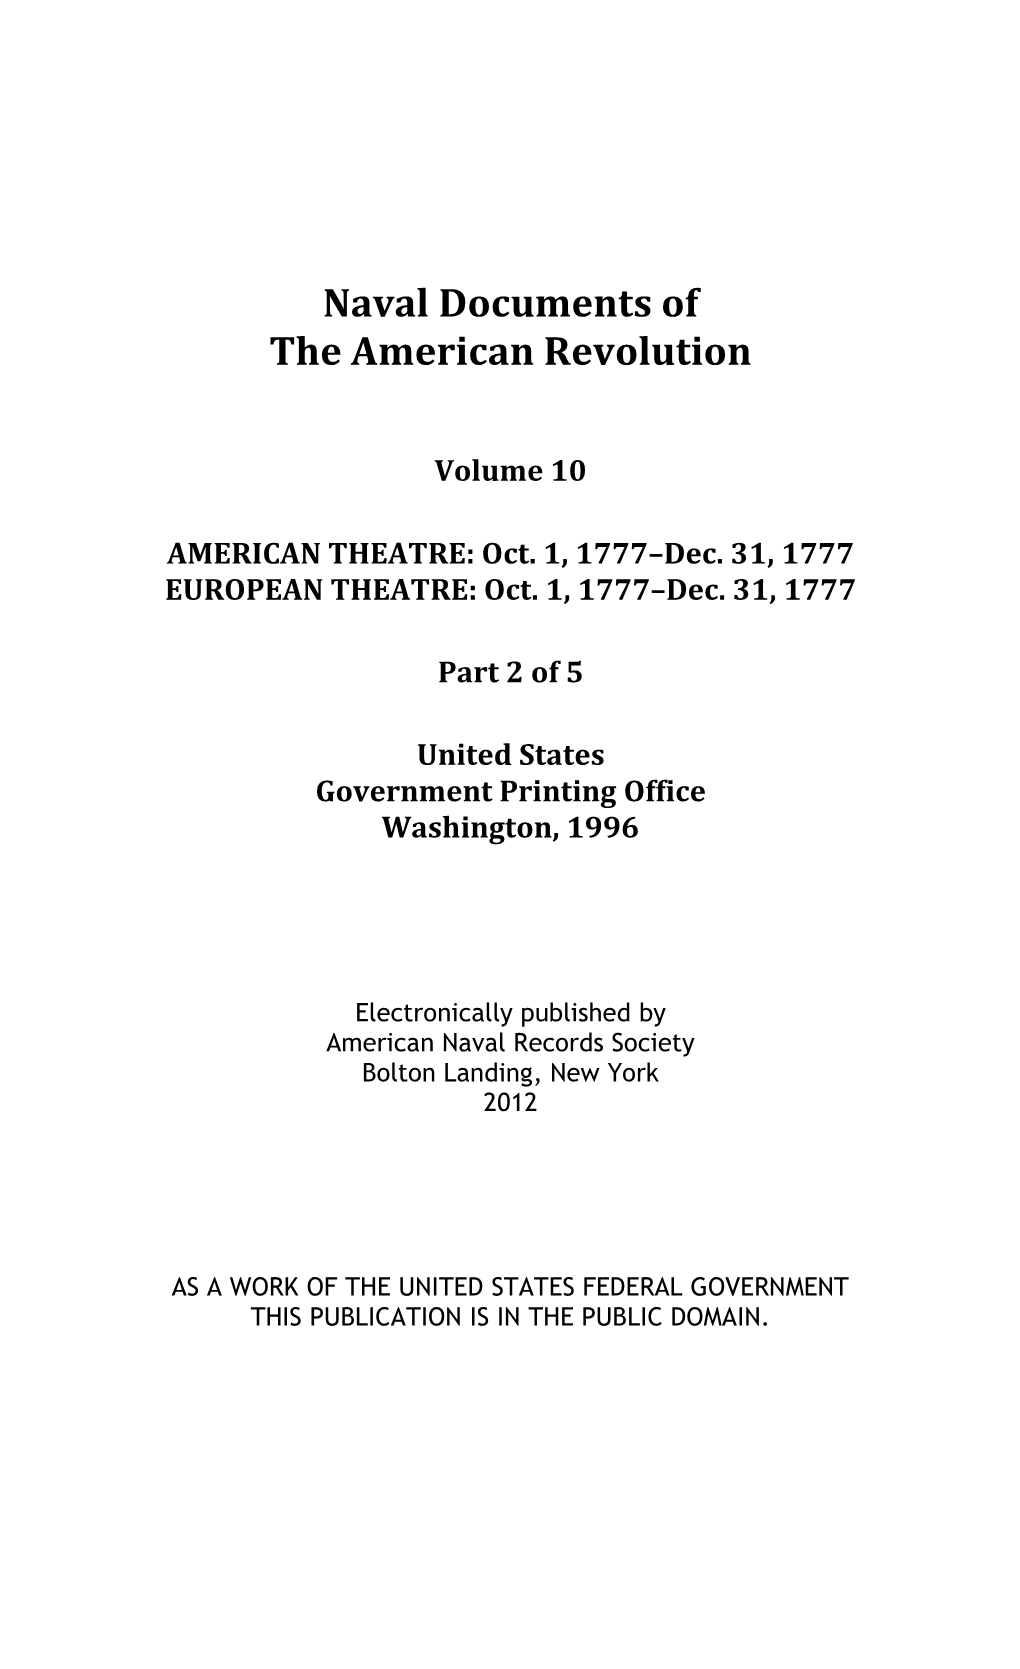 Naval Documents of the American Revolution, Volume 10, Part 2